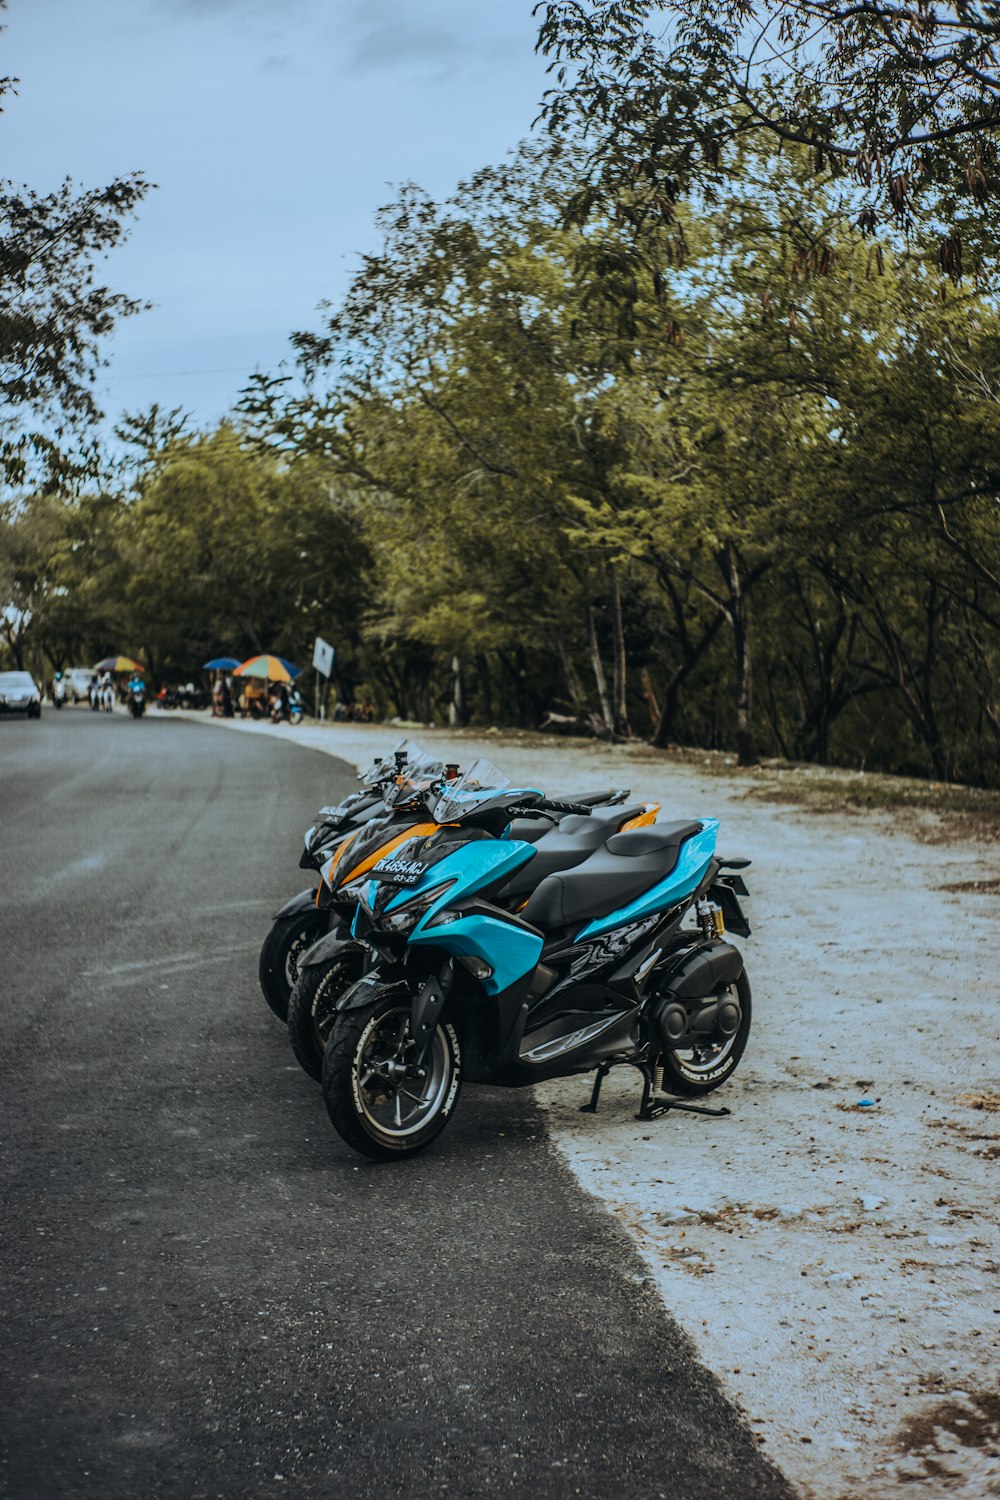 blue and black sports bike on road during daytime